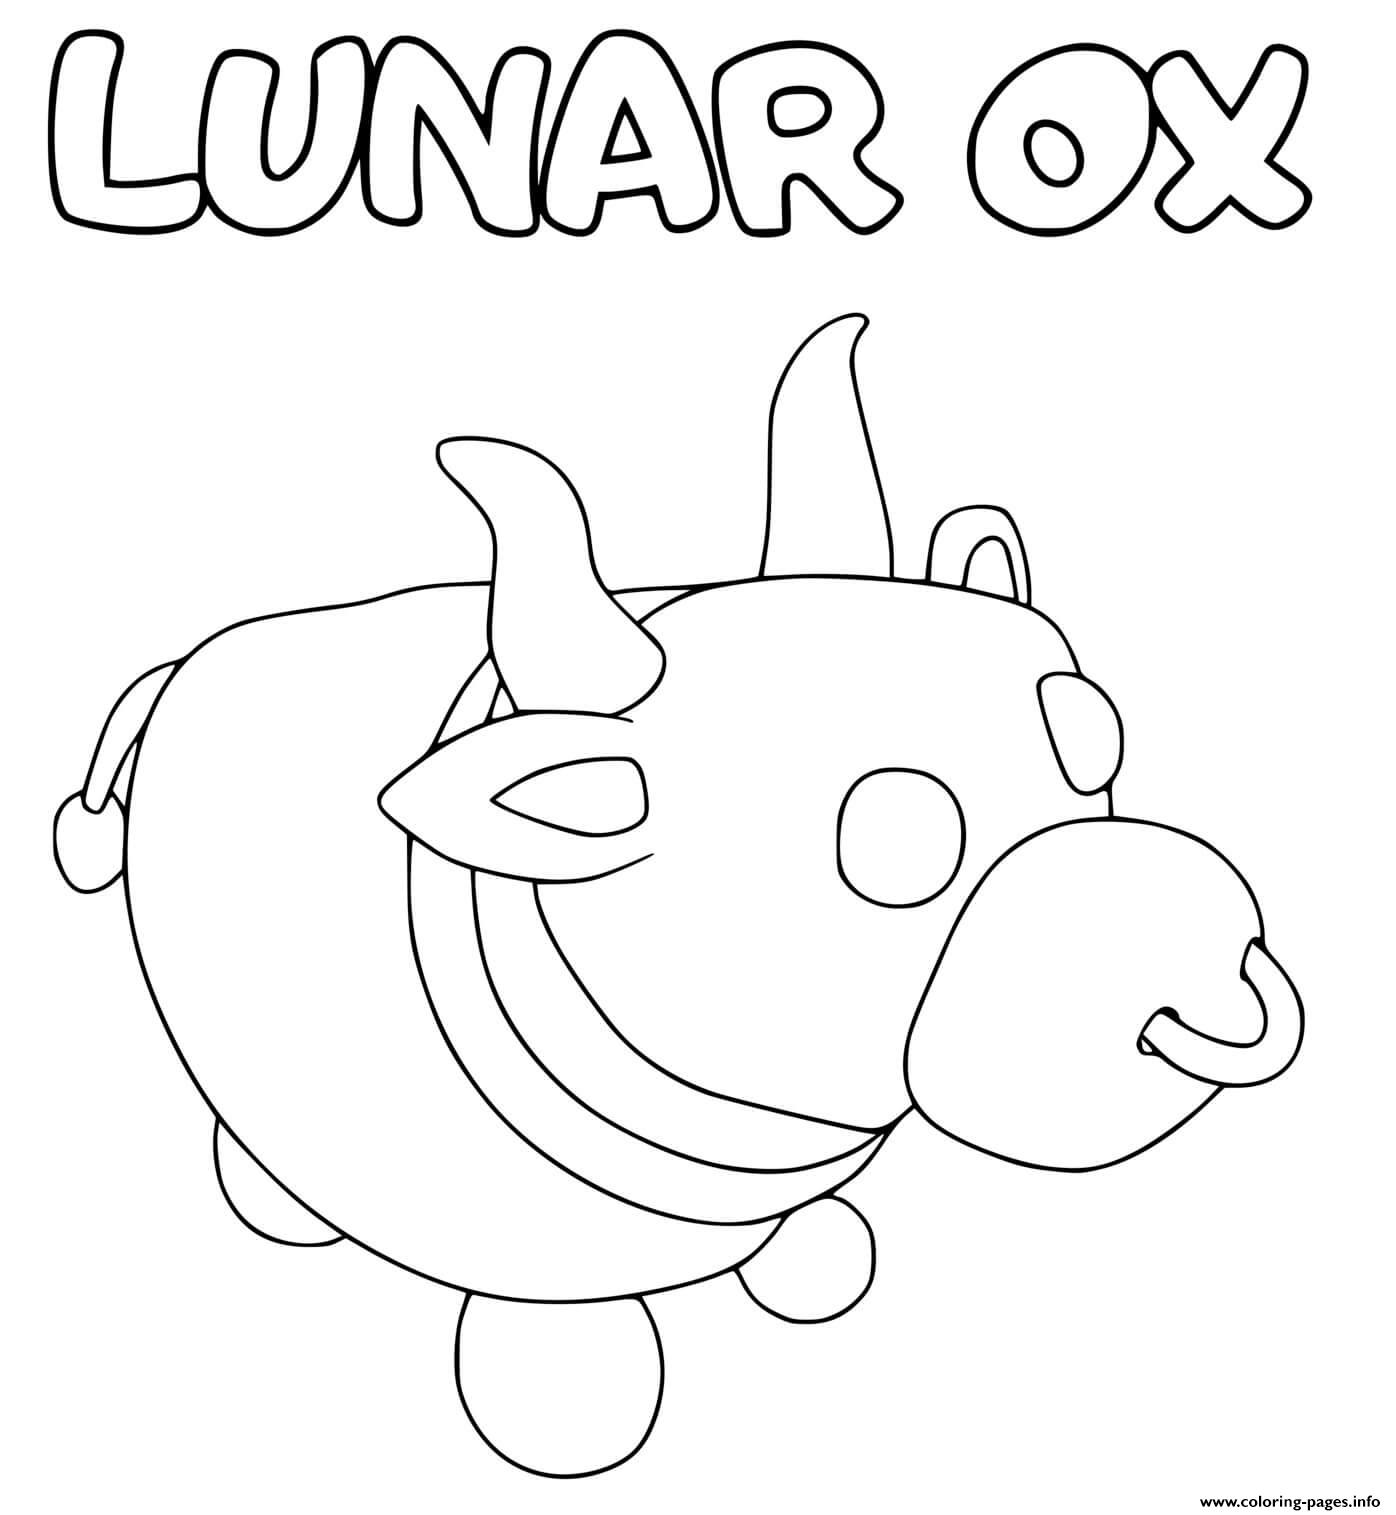 Adopt Me Lunar Ox Coloring Pages Printable - roblox coloring pages adopt me